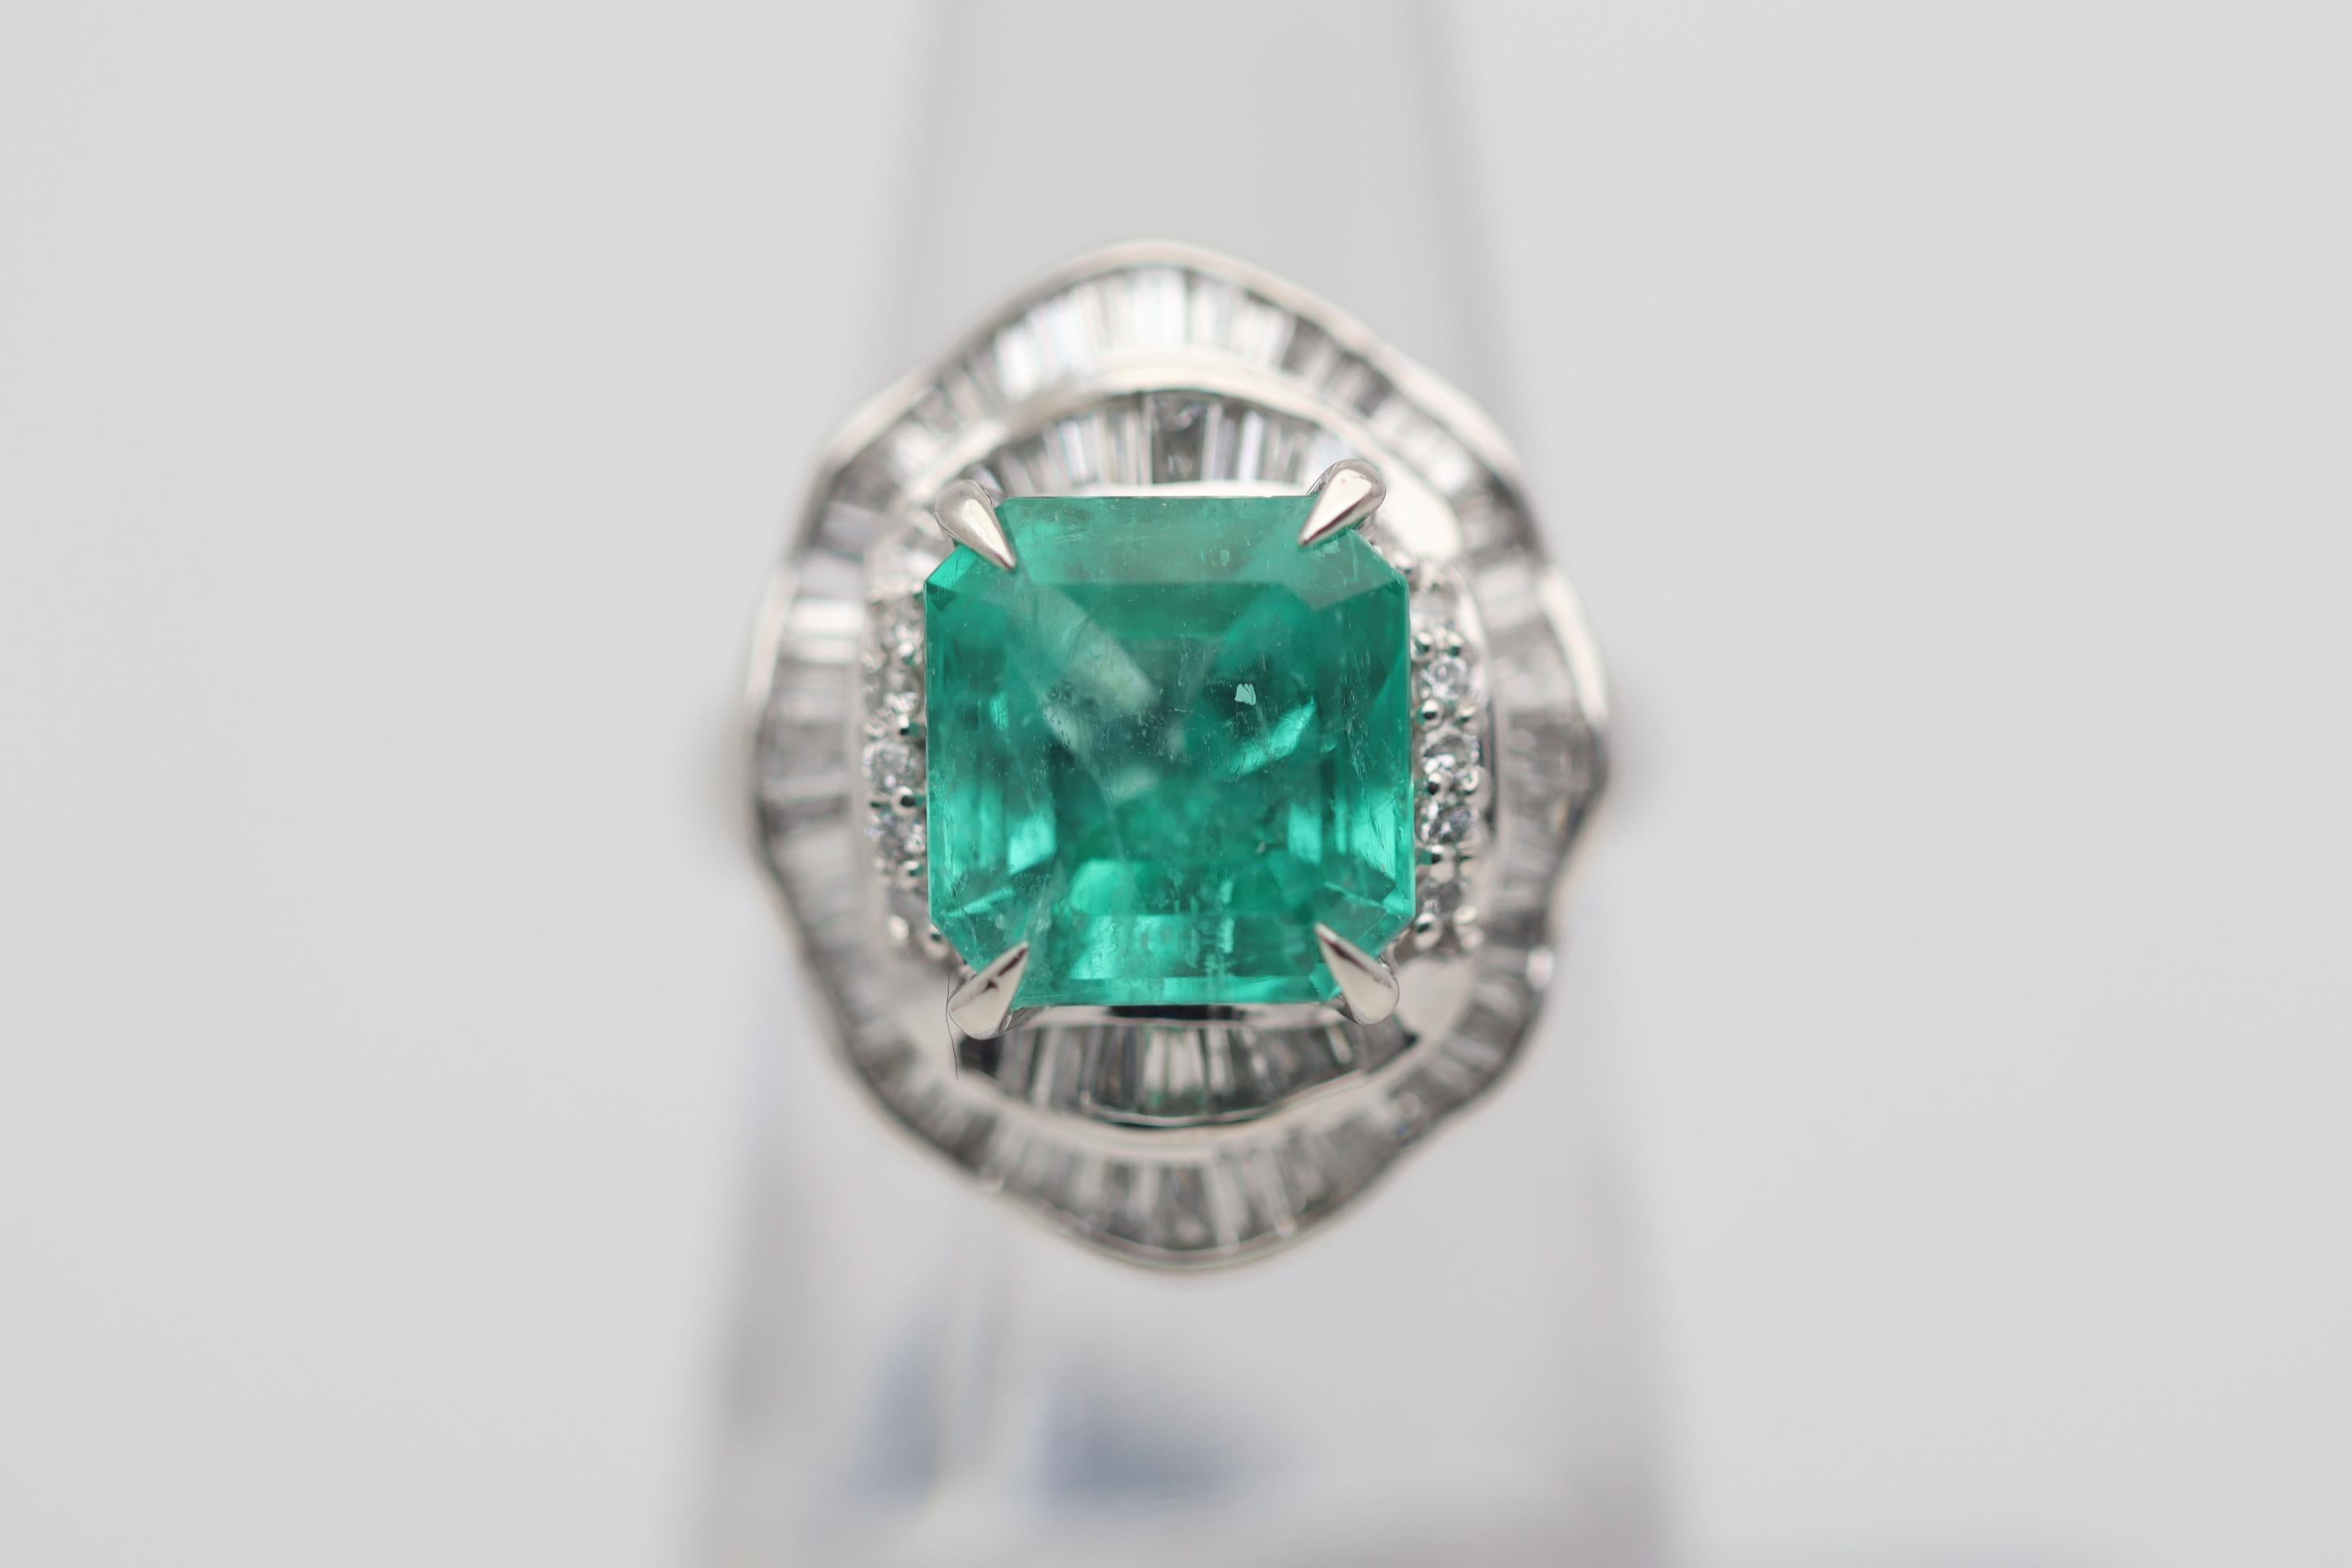 A fine platinum ring featuring a 5.08 carat emerald. It has a bright brilliant green color and most likely originates from Colombia. It is accented by 1.21 carats of round brilliant and baguette-cut diamonds set around the emerald in a stylish